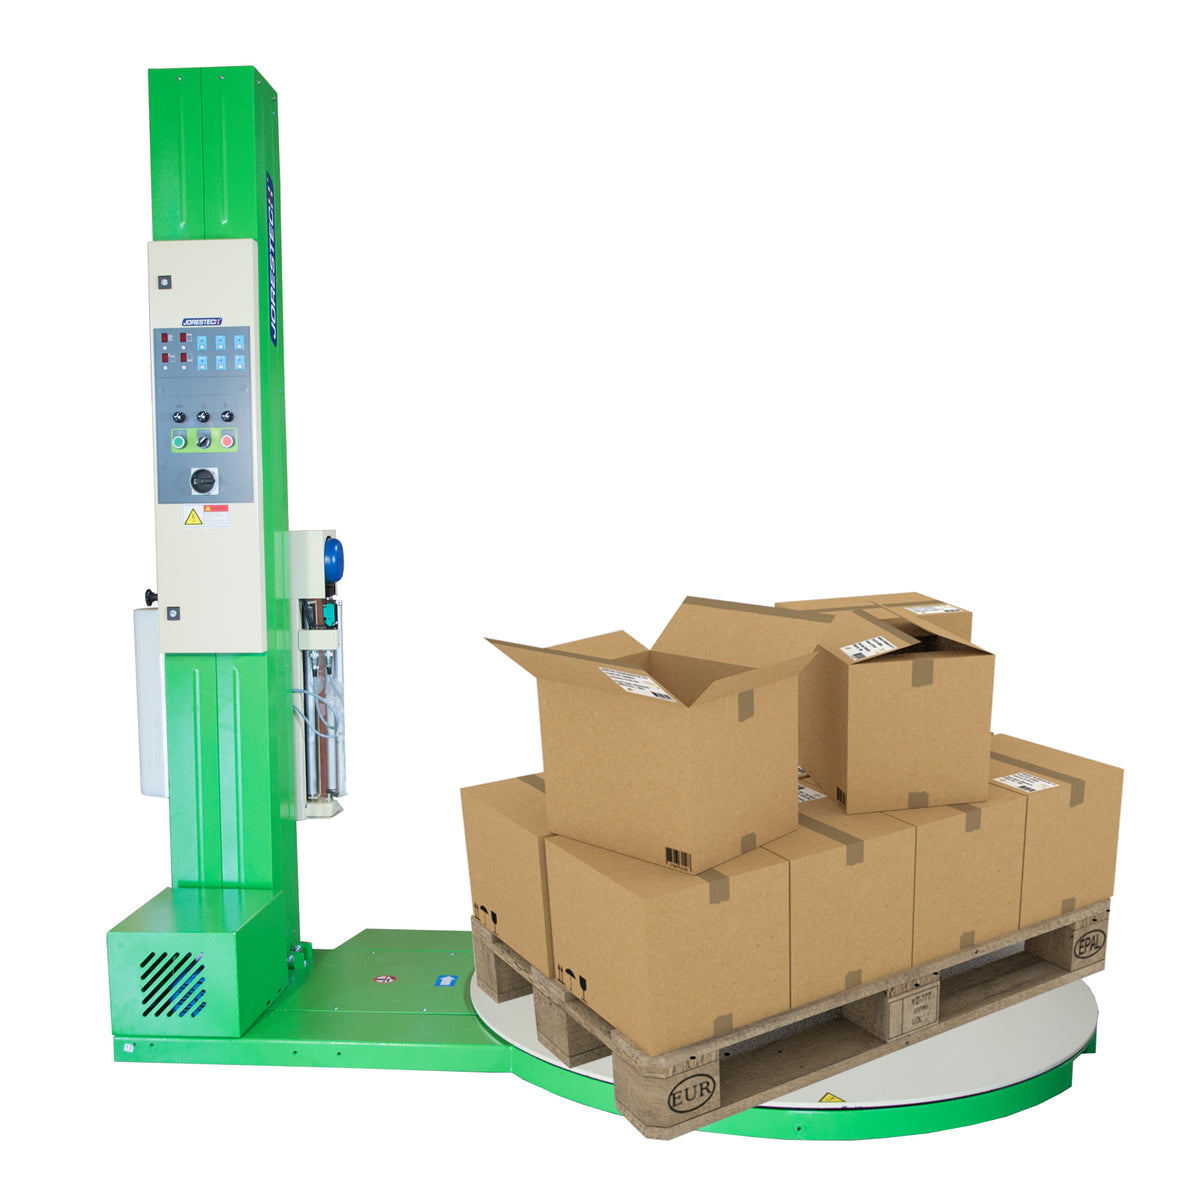 Comparative: Stretch Wrapping Vs Strapping Systems for pallet securing